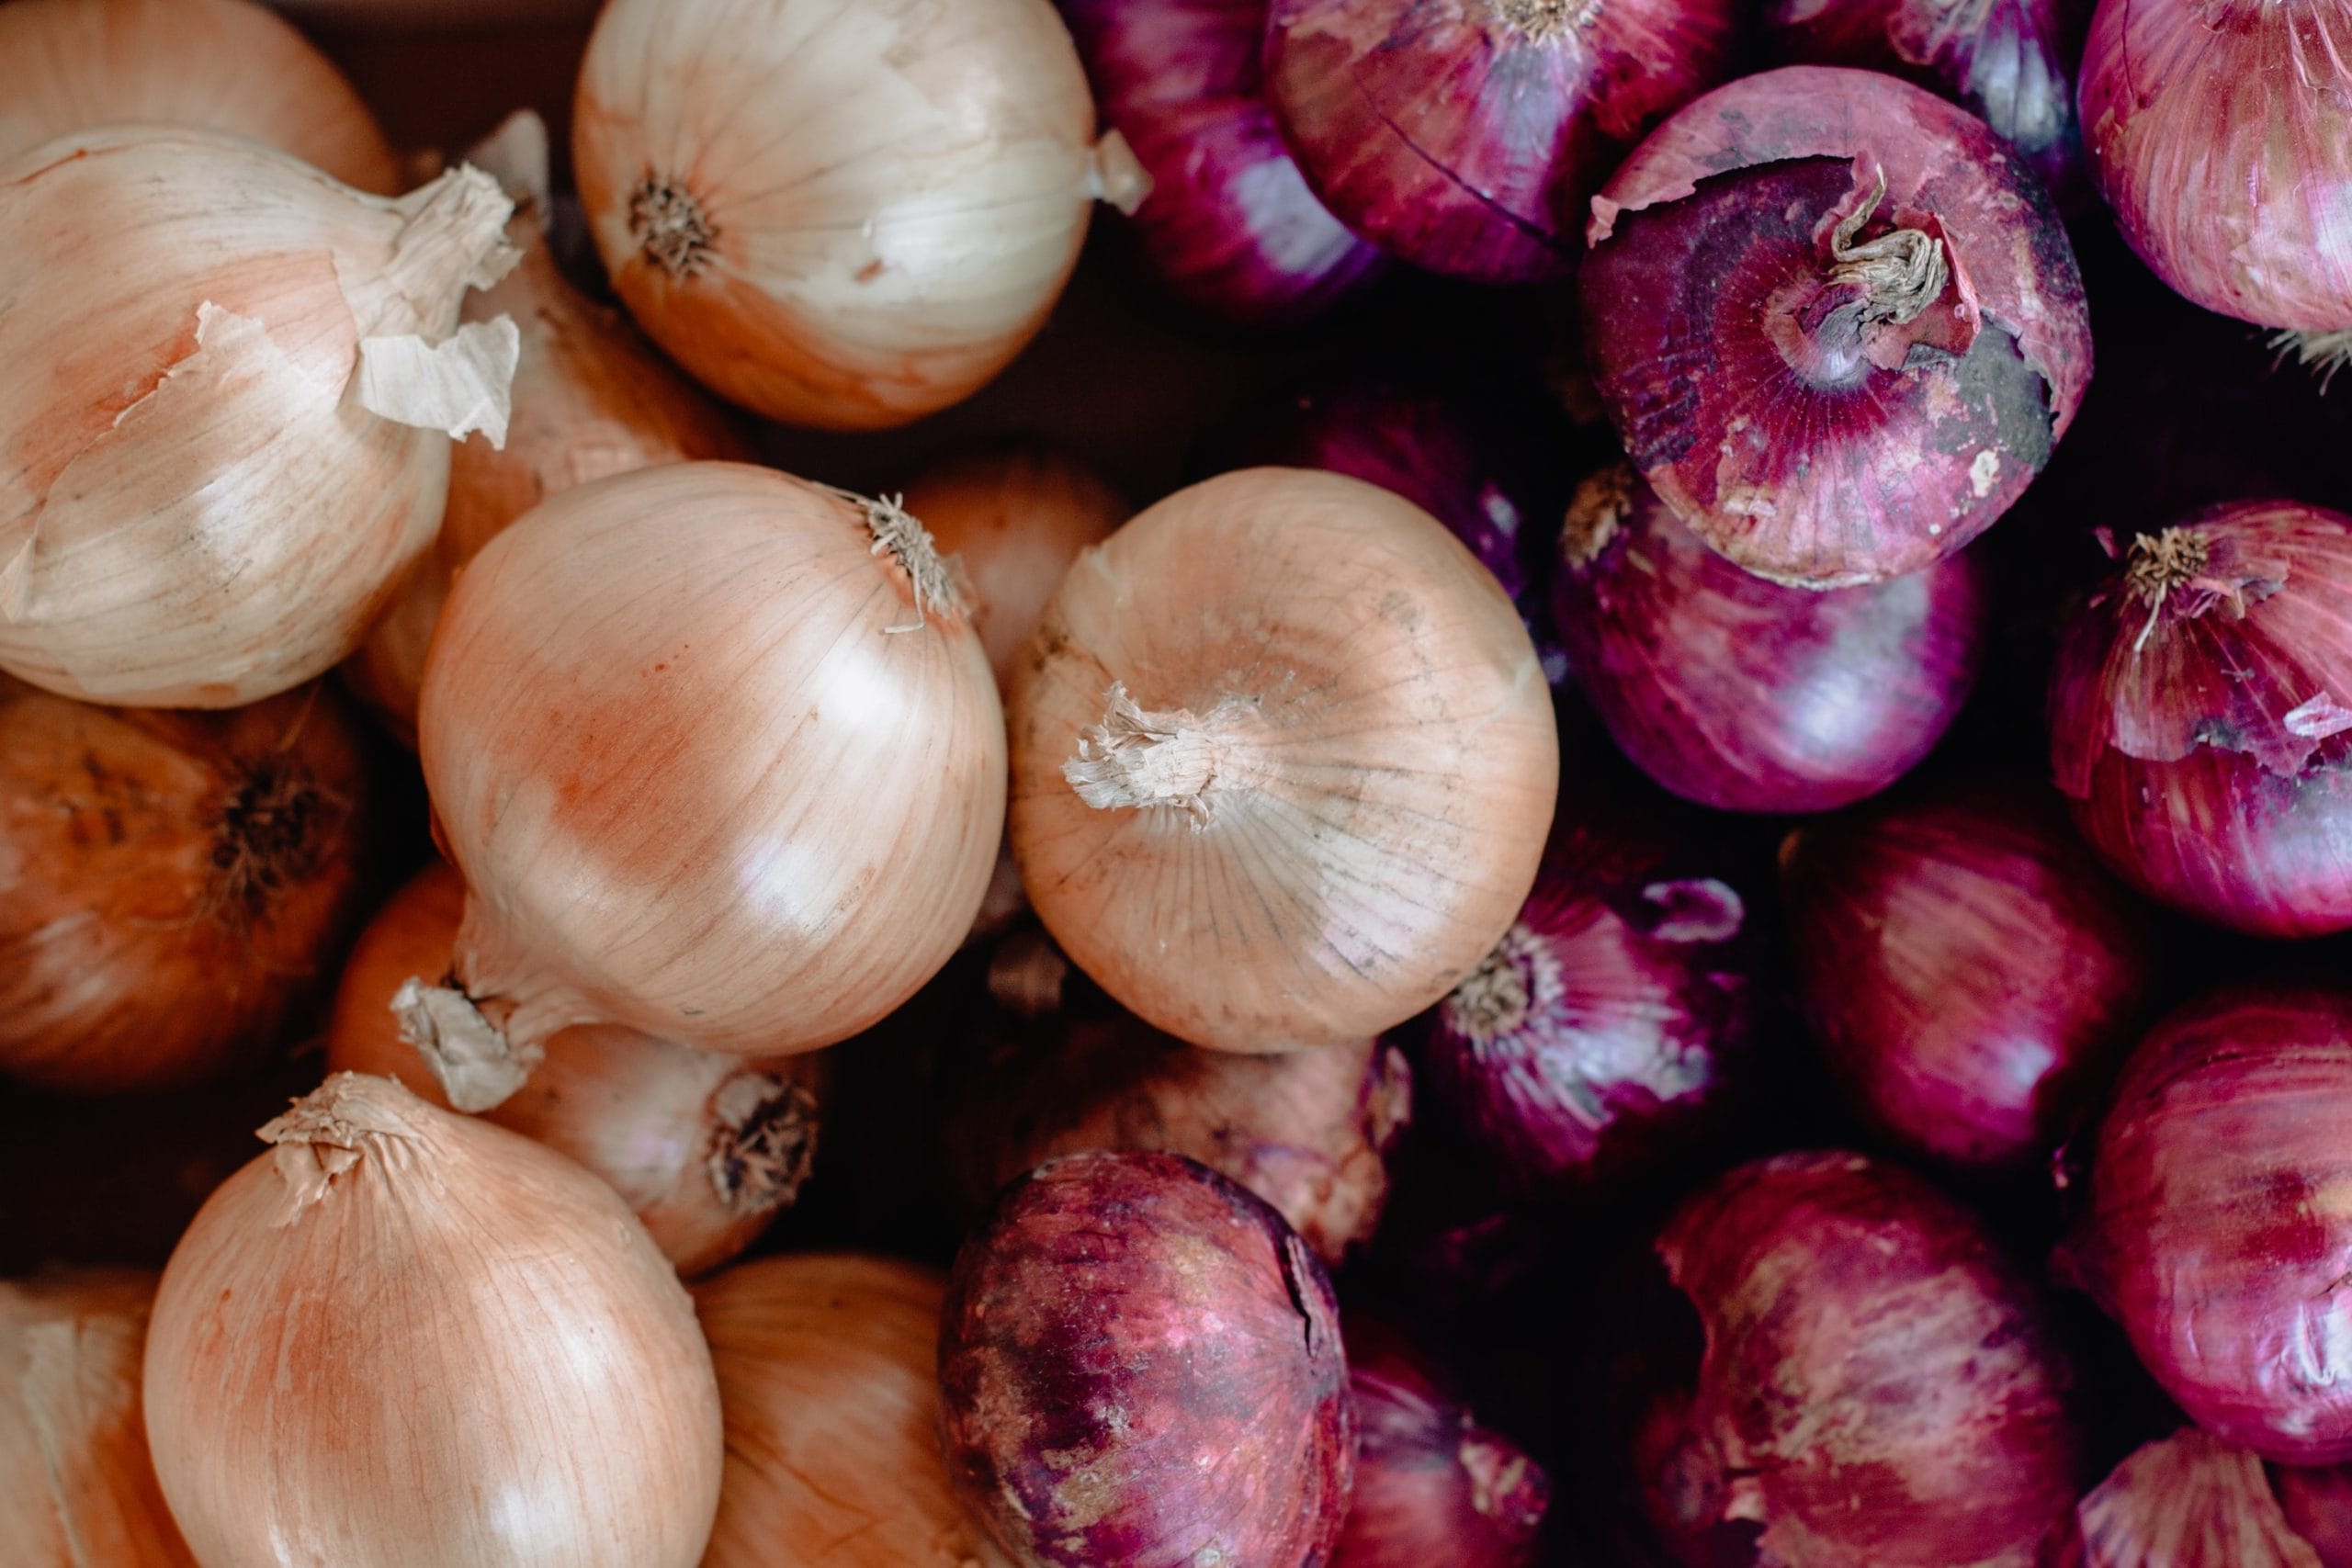 Which Onion is Good for Health: Red or White? The Verdict